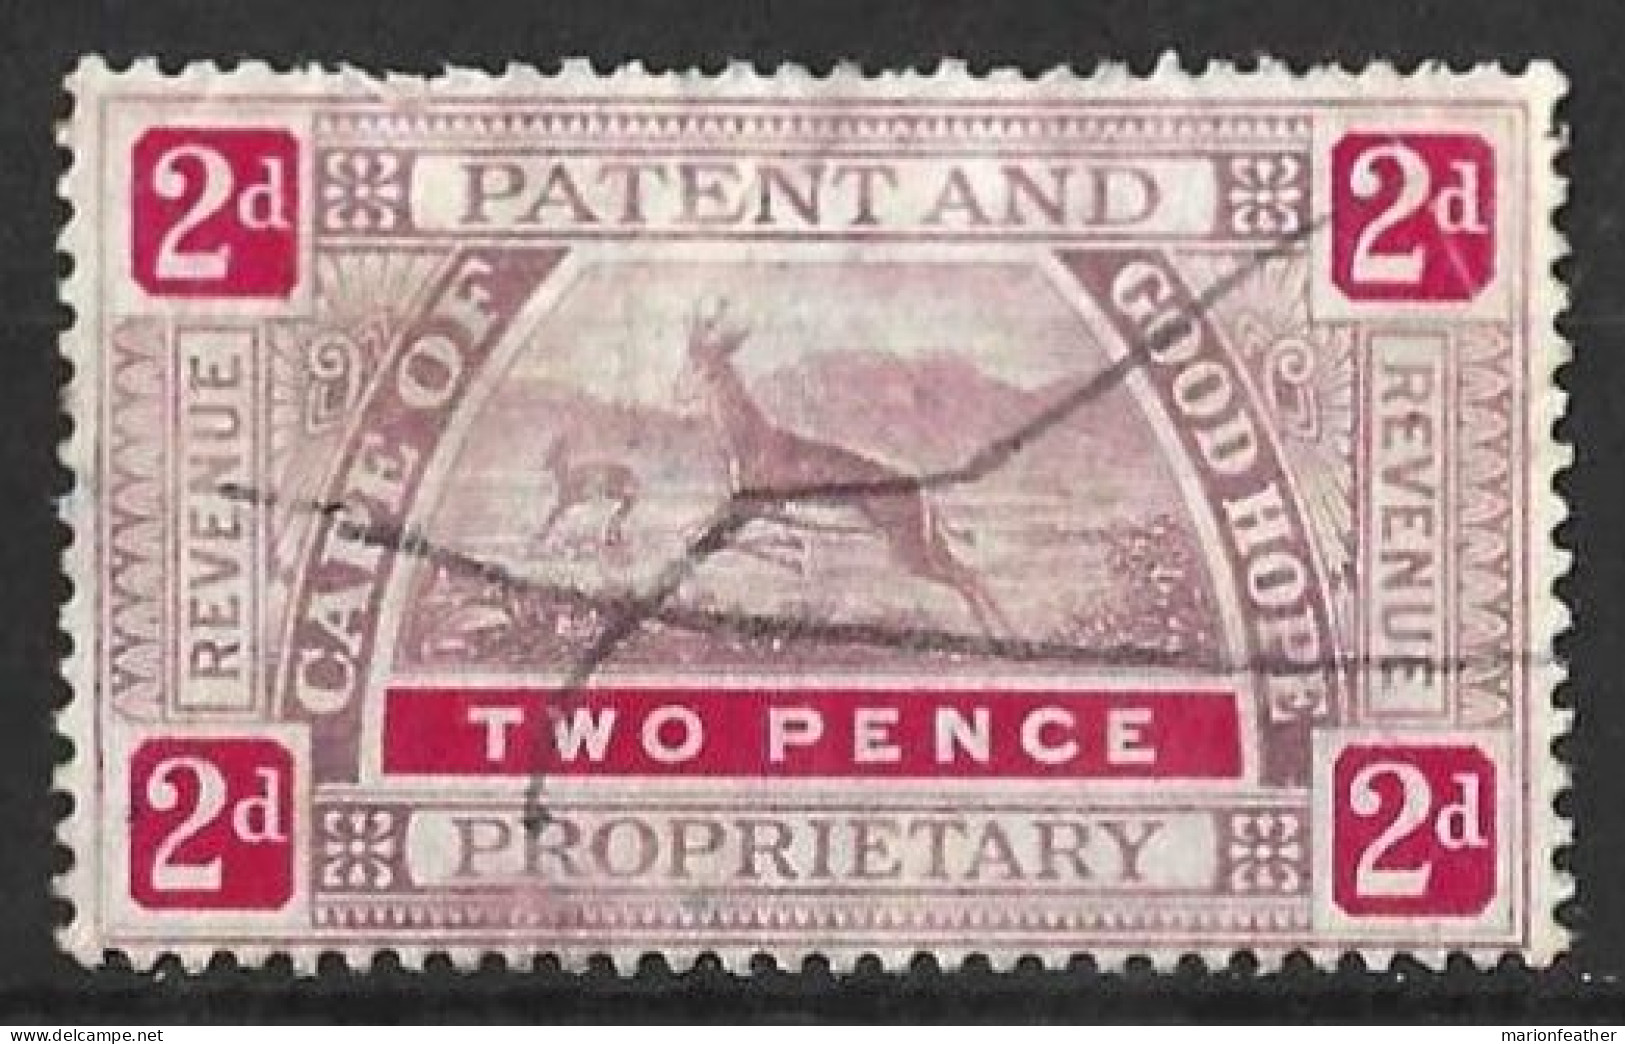 SOUTH  AFRICA.." C.O.G.H..."....KING EDWARD VII..(1901-10.).."..PATENT OFFICE.."......2d......BF12.......USED.... - Cape Of Good Hope (1853-1904)